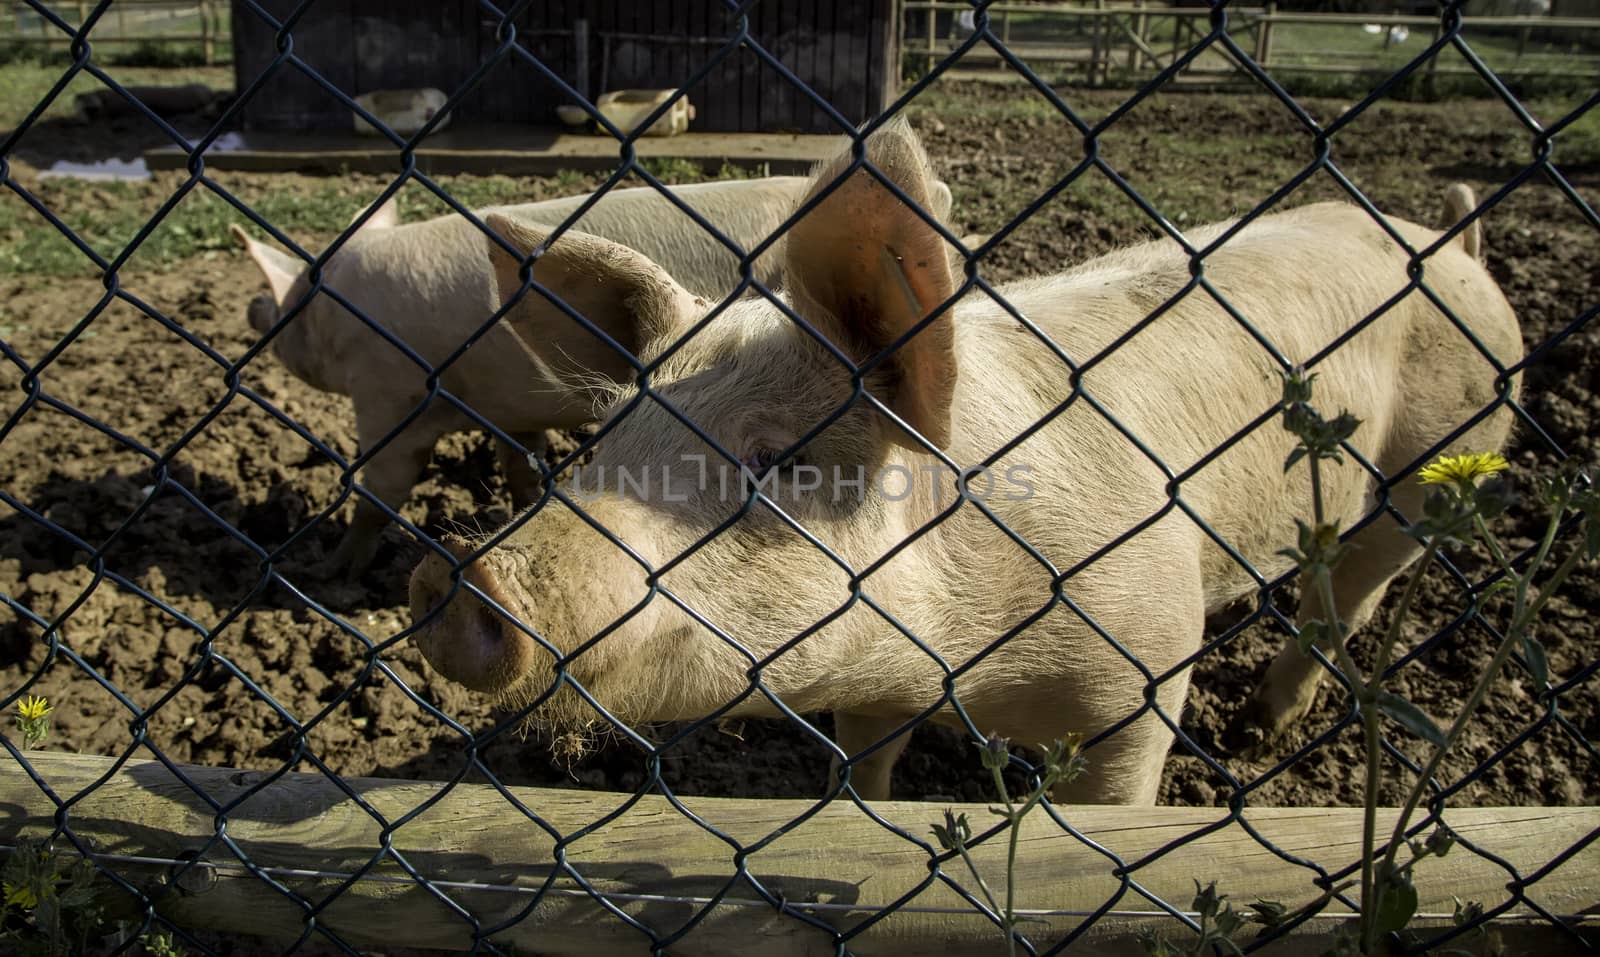 Farm pig, meat industry detail